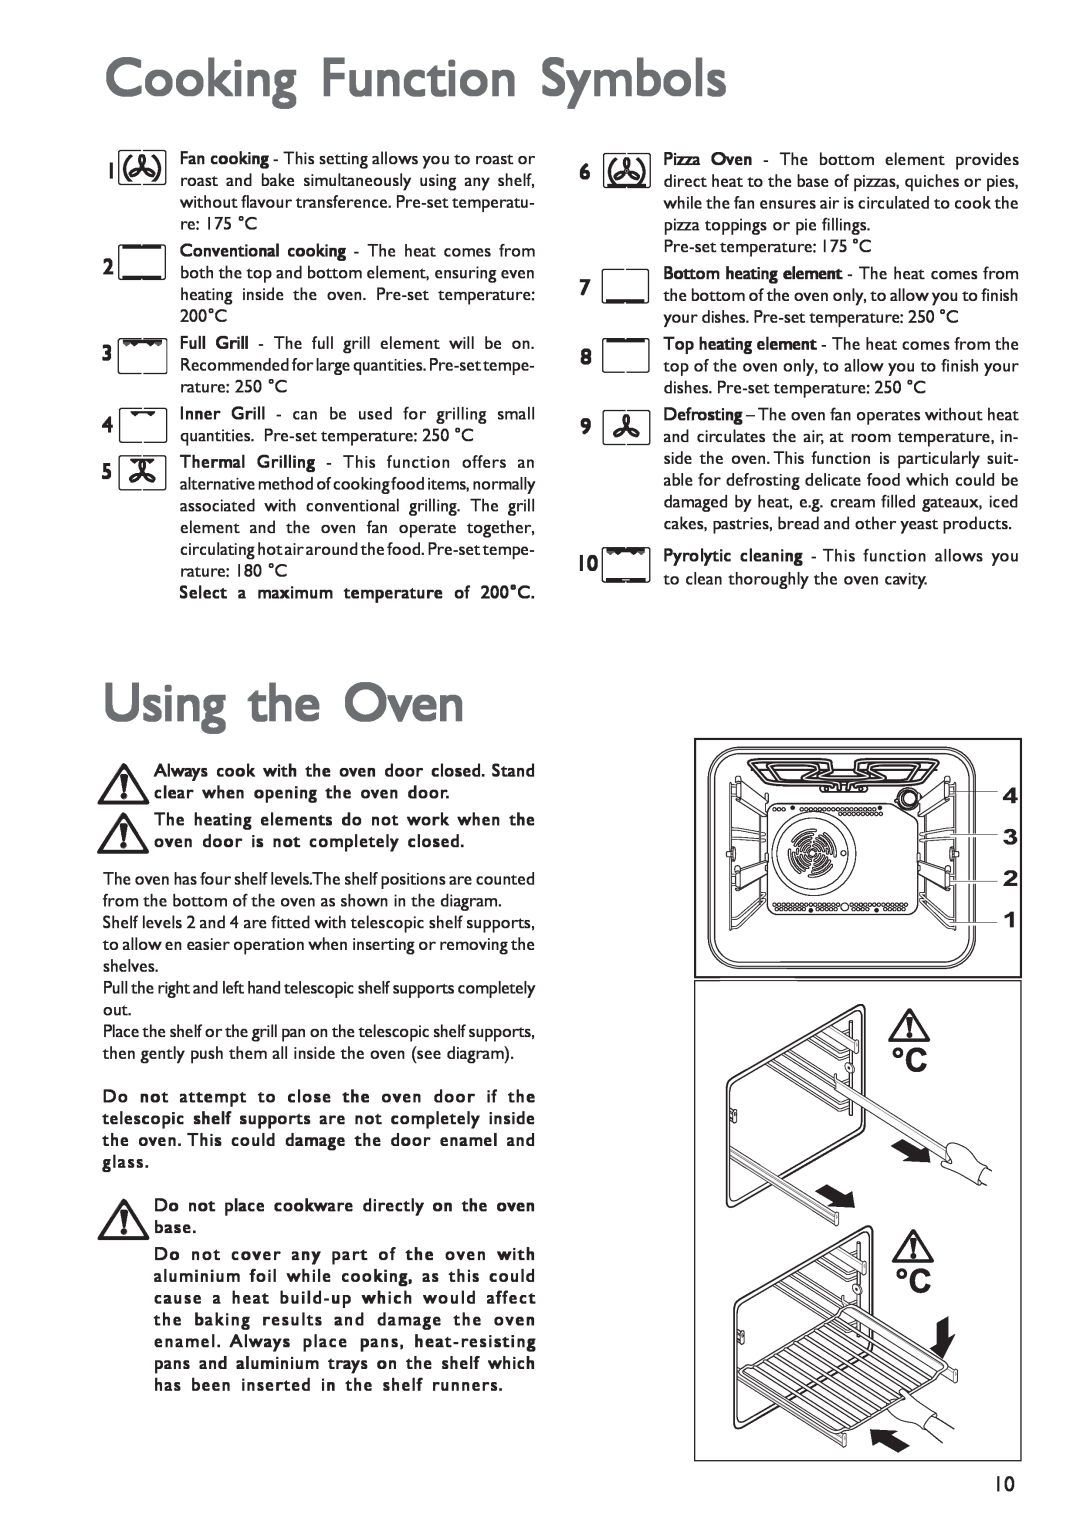 John Lewis JLBIOS603 instruction manual Cooking Function Symbols, Using the Oven 